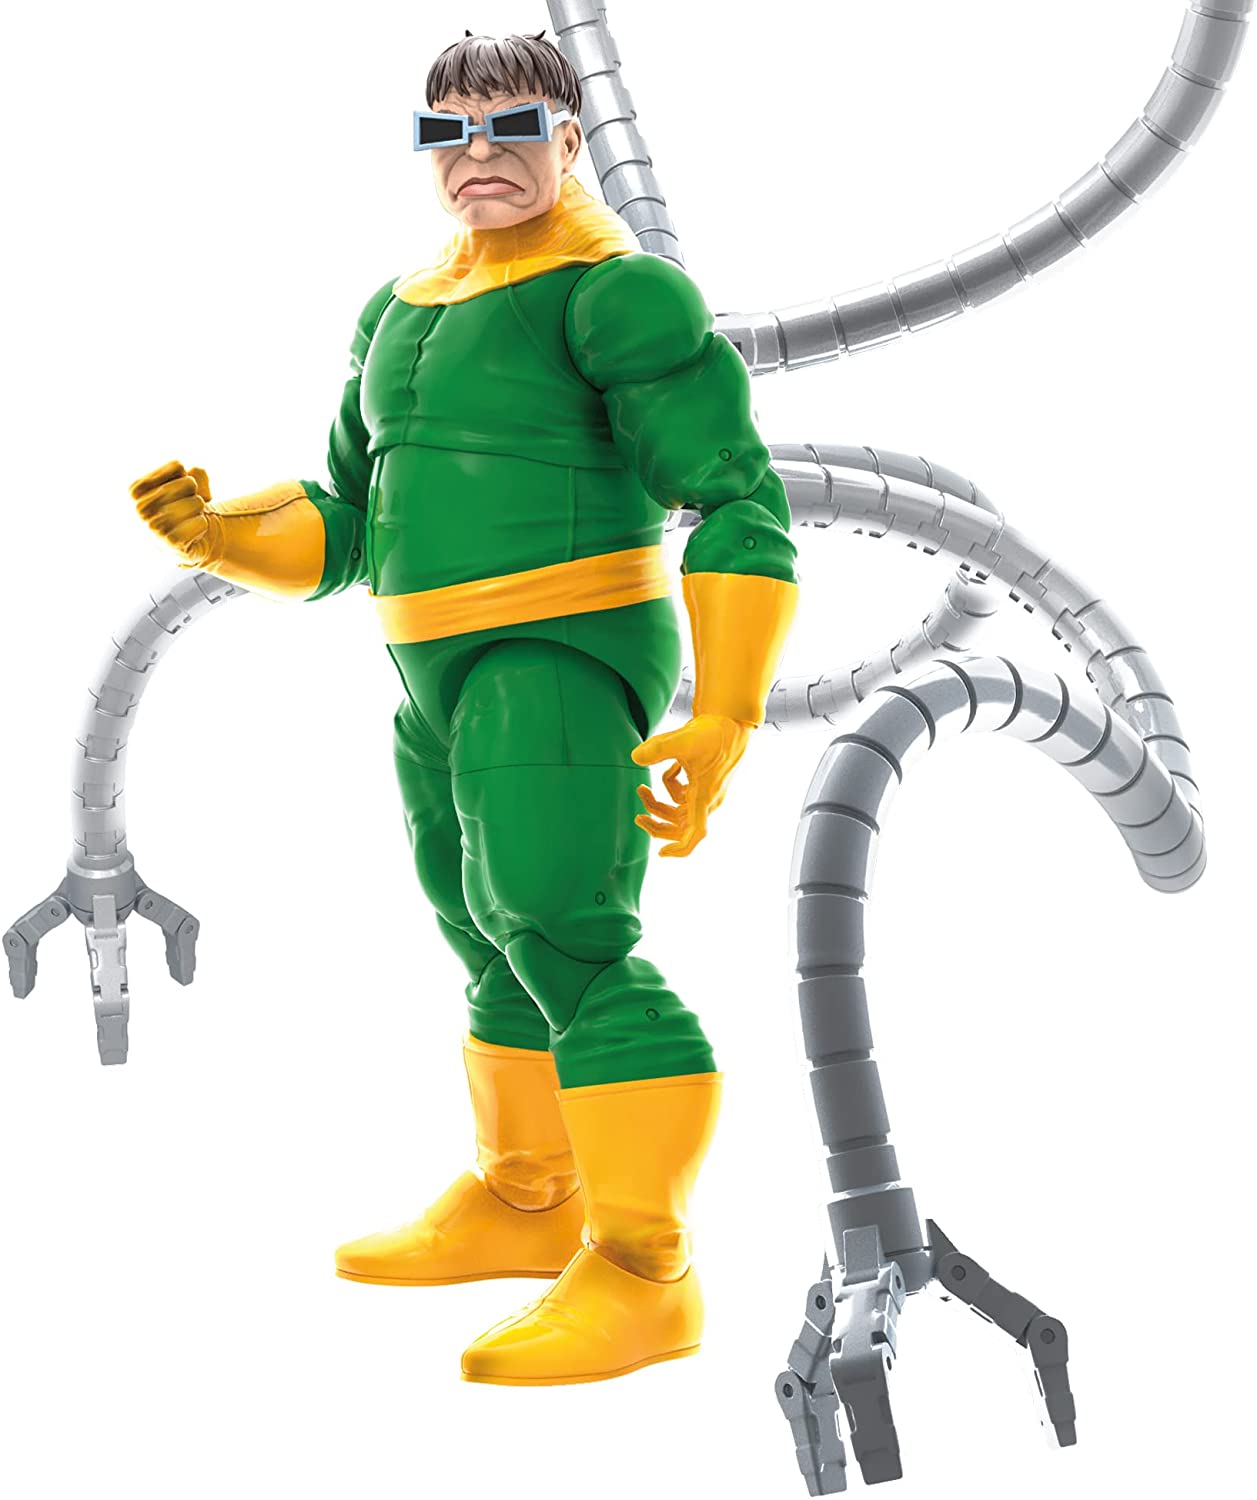 Marvel Legends Series Spider-Man 60th Anniversary Silk and Doctor Octopus 2-Pack Hasbro Toys